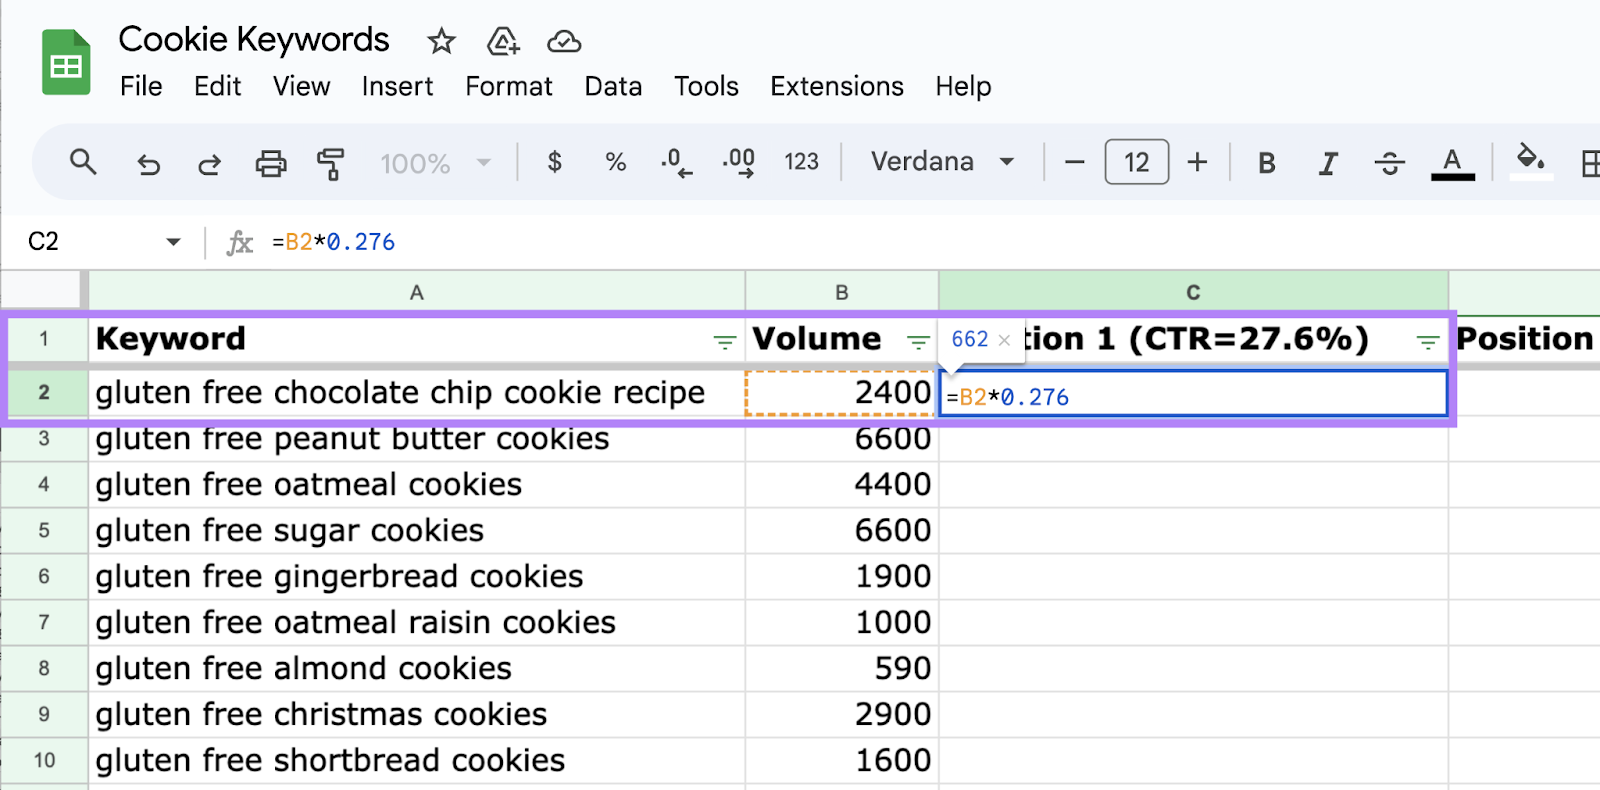 Calculating the CTR successful  the Google spreadsheet